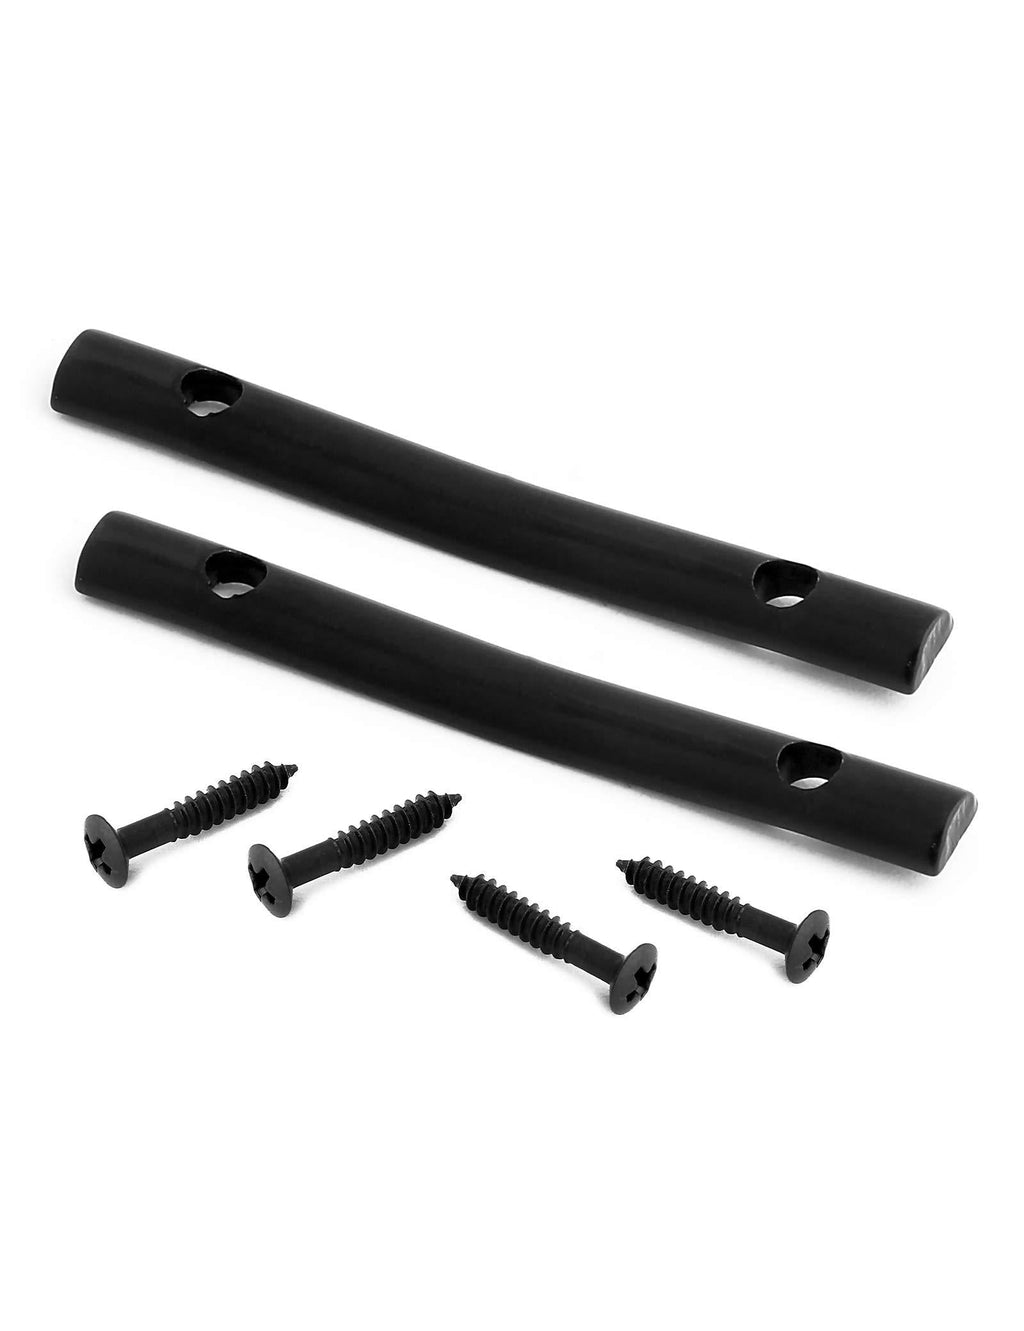 Holmer Guitar String Retainer Bar String Tension Bars Headstock String Trees 44.8mm for Floyd Rose Tremolo Style Electric Guitar Parts Black.